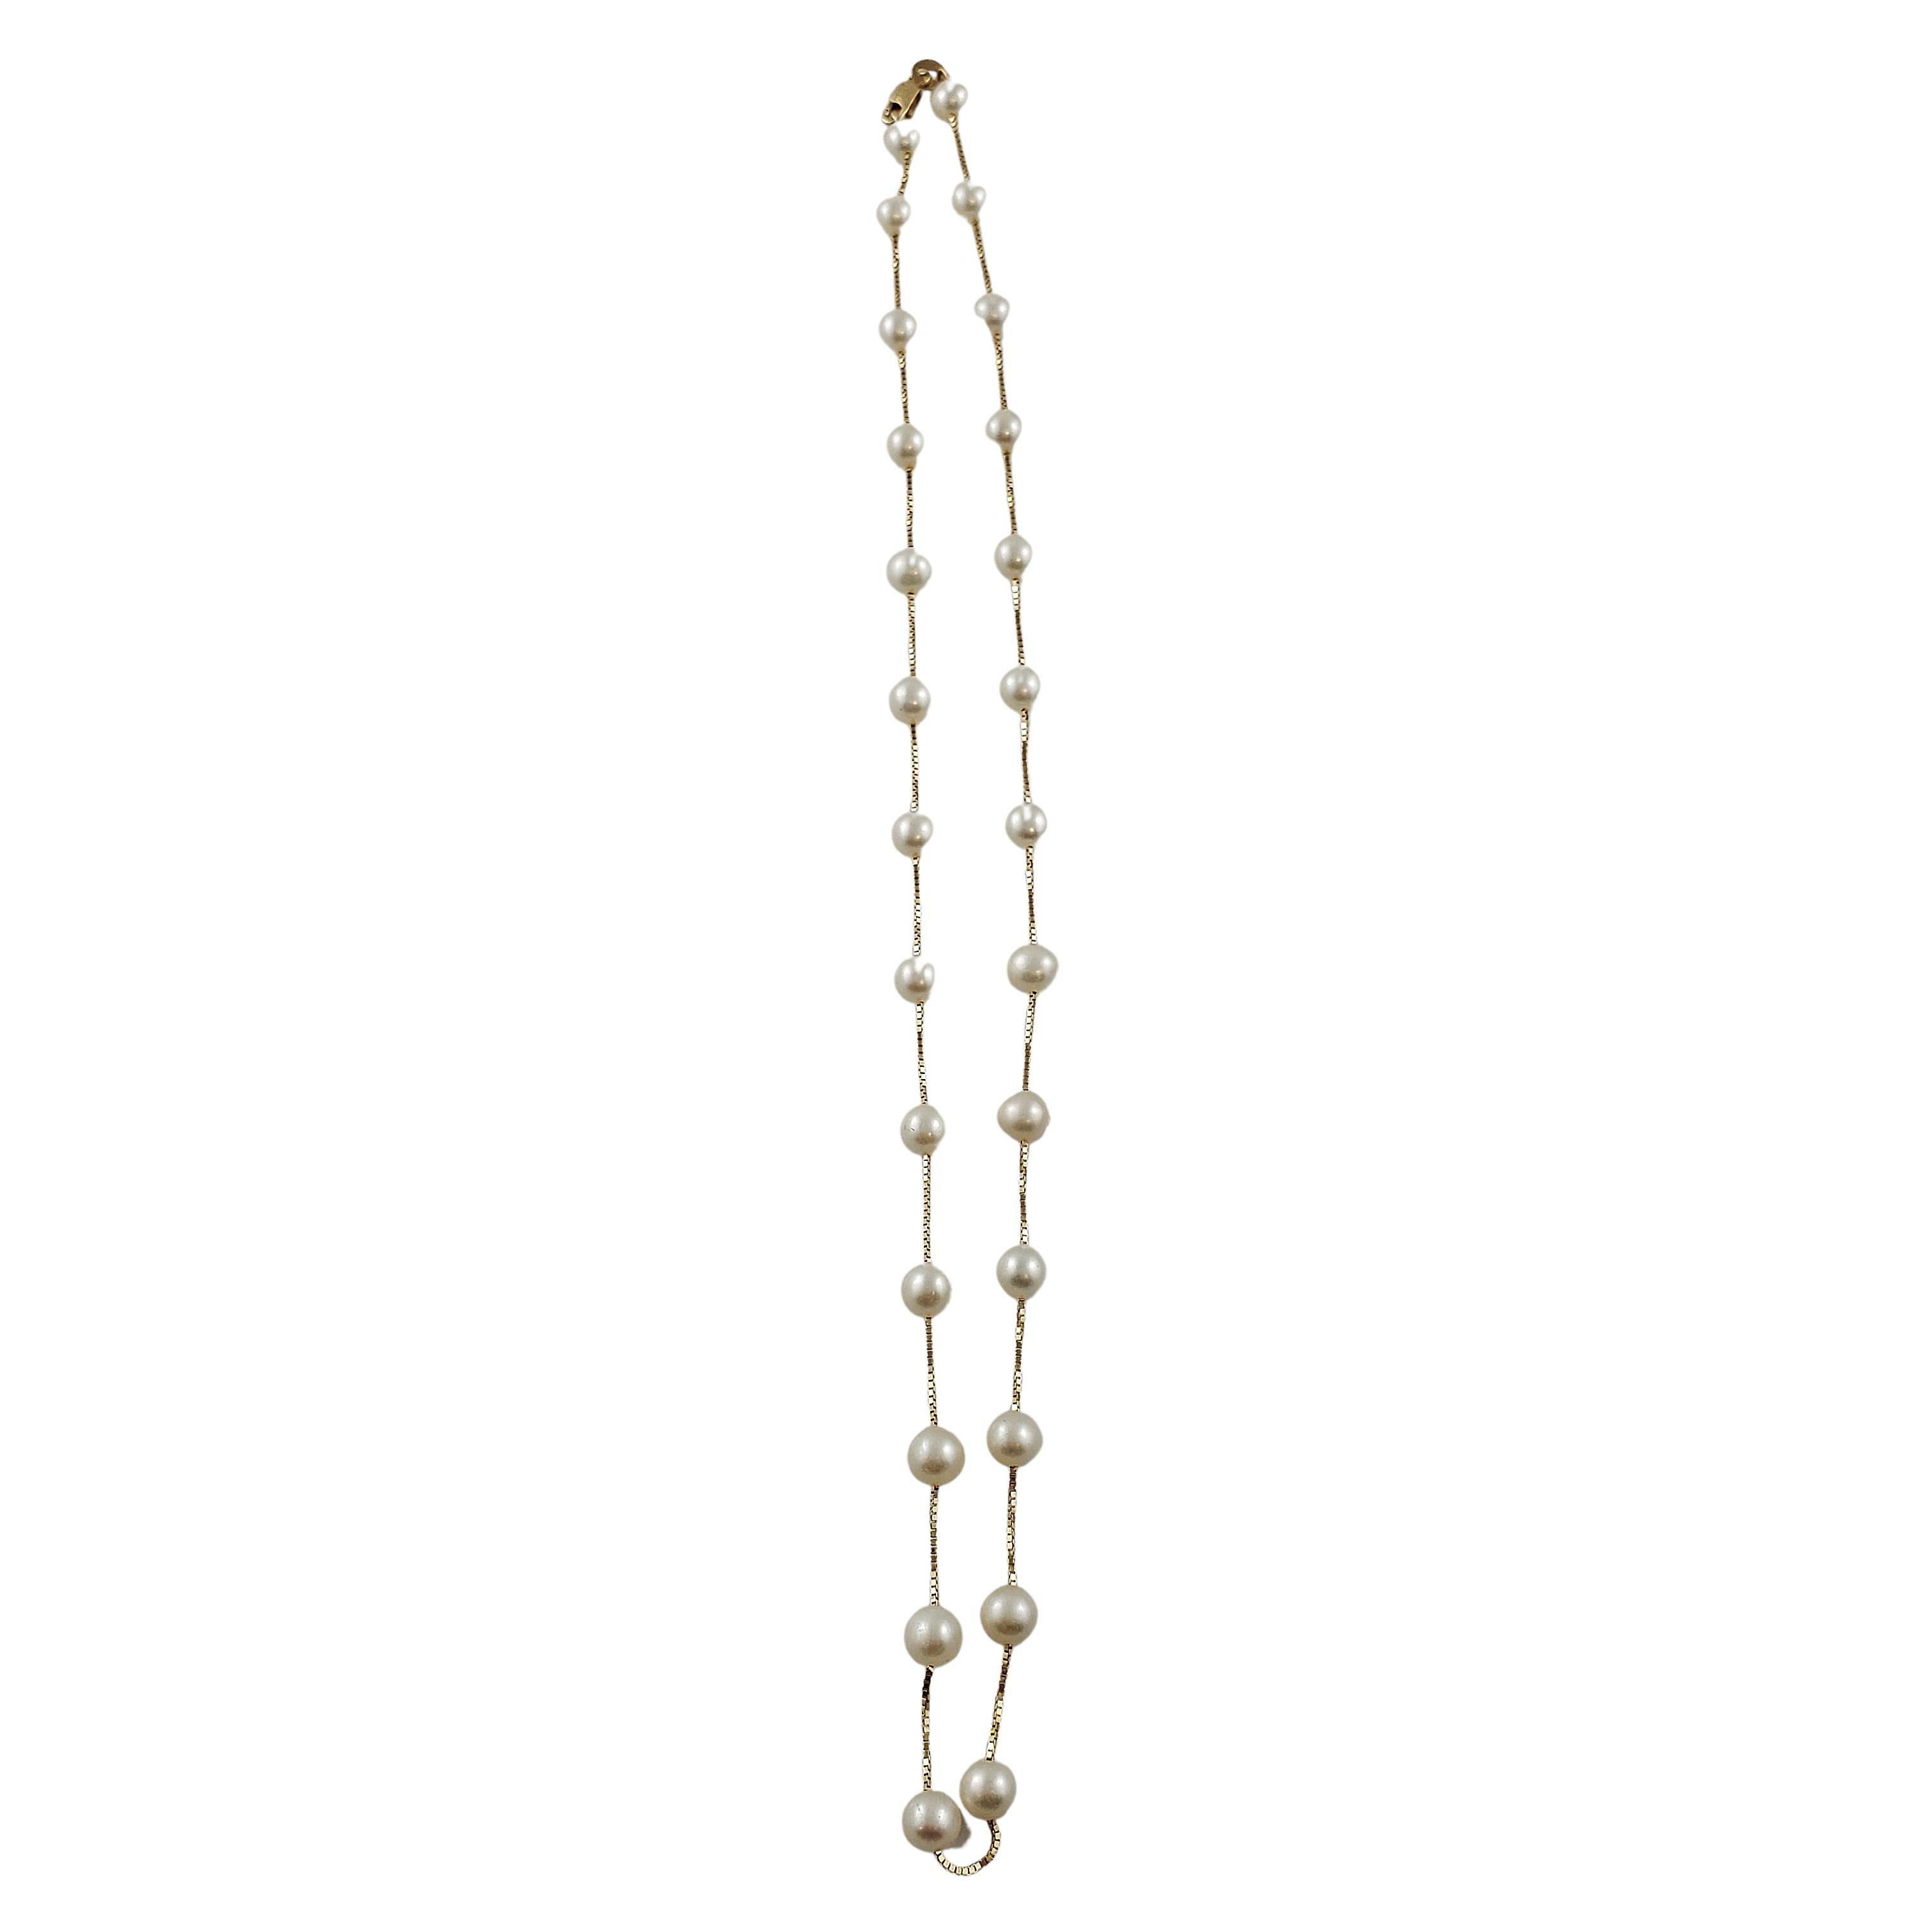 14K Yellow Gold Pearl and Chain Necklace

Beautiful necklace with 26 pearls separated by 13mm of 14k yellow gold chain in-between.

Chain length: 15 inch

Weight: 9.0 gr / 5.7 dwt

26 Pearls

Hallmark: 14K Italy tecrugold

Will be wrapped securely